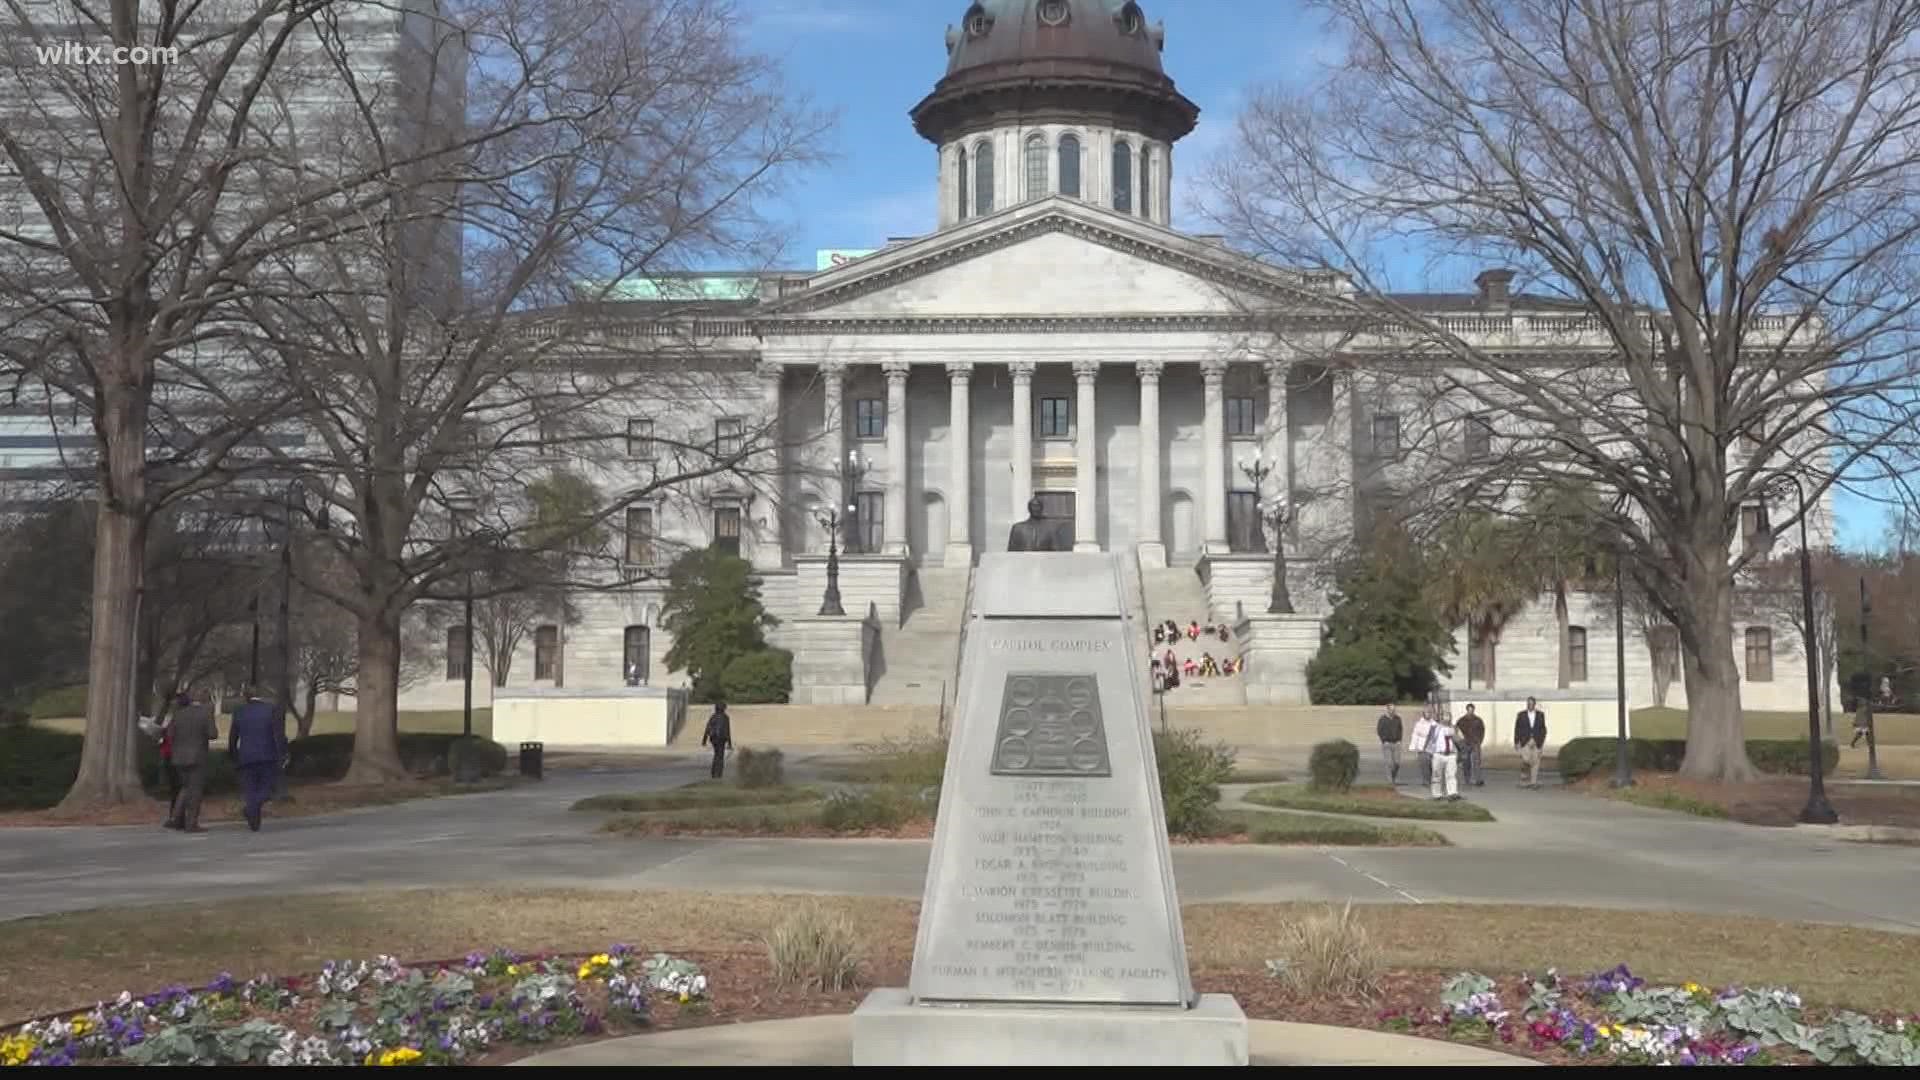 The bill would allow state employees to take the Juneteenth holiday or any other day instead of Confederate Memorial day passes Senate.